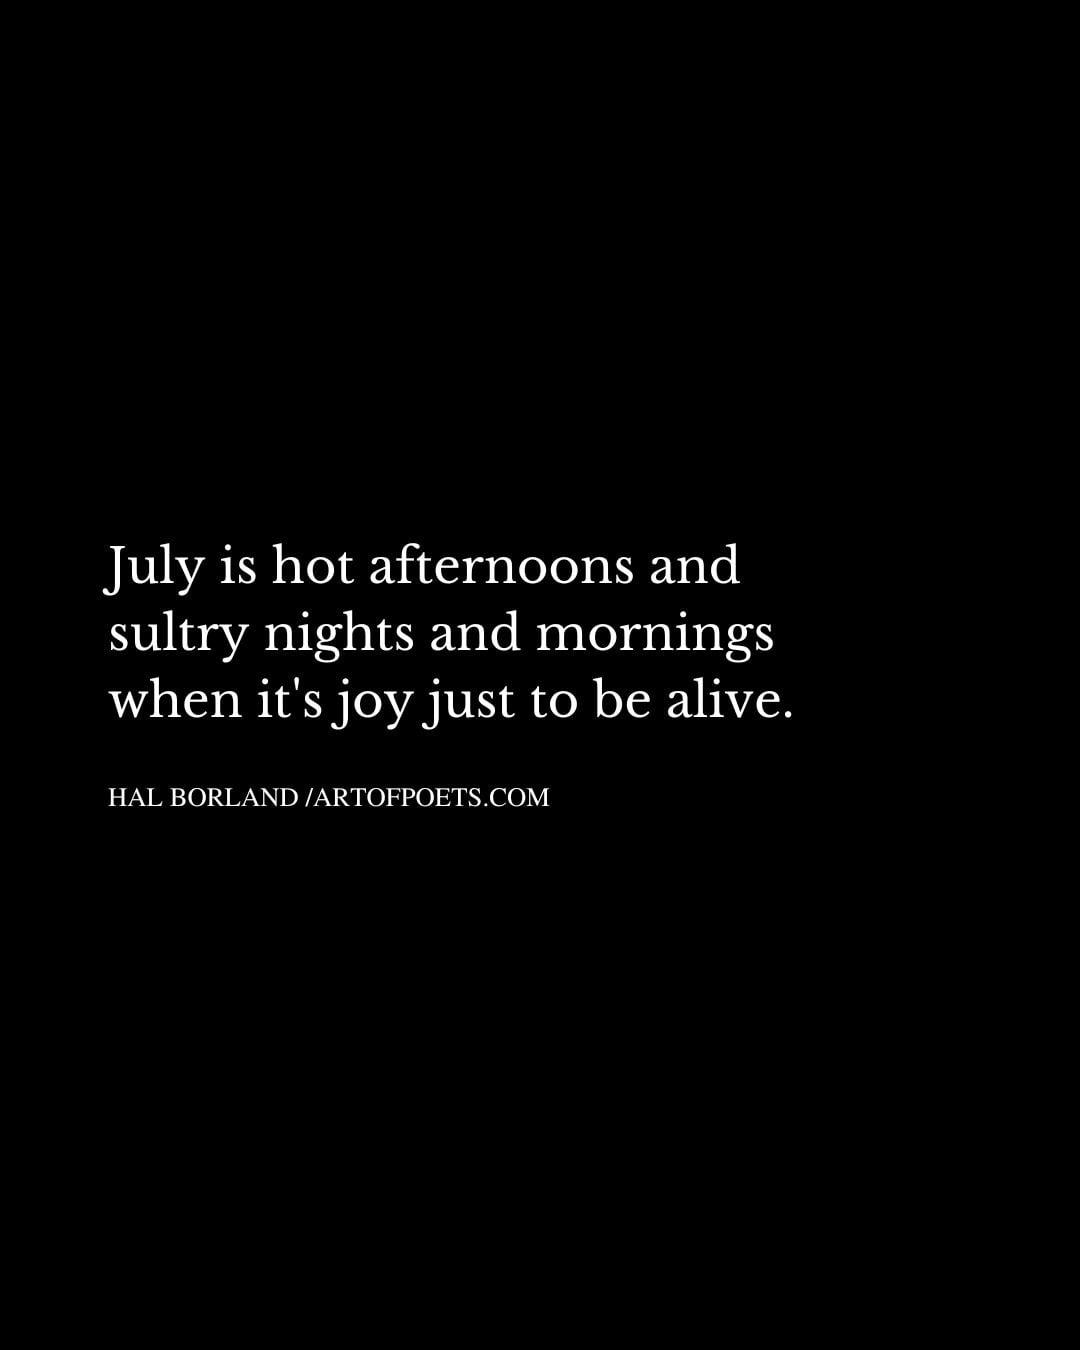 July is hot afternoons and sultry nights and mornings when its joy just to be alive